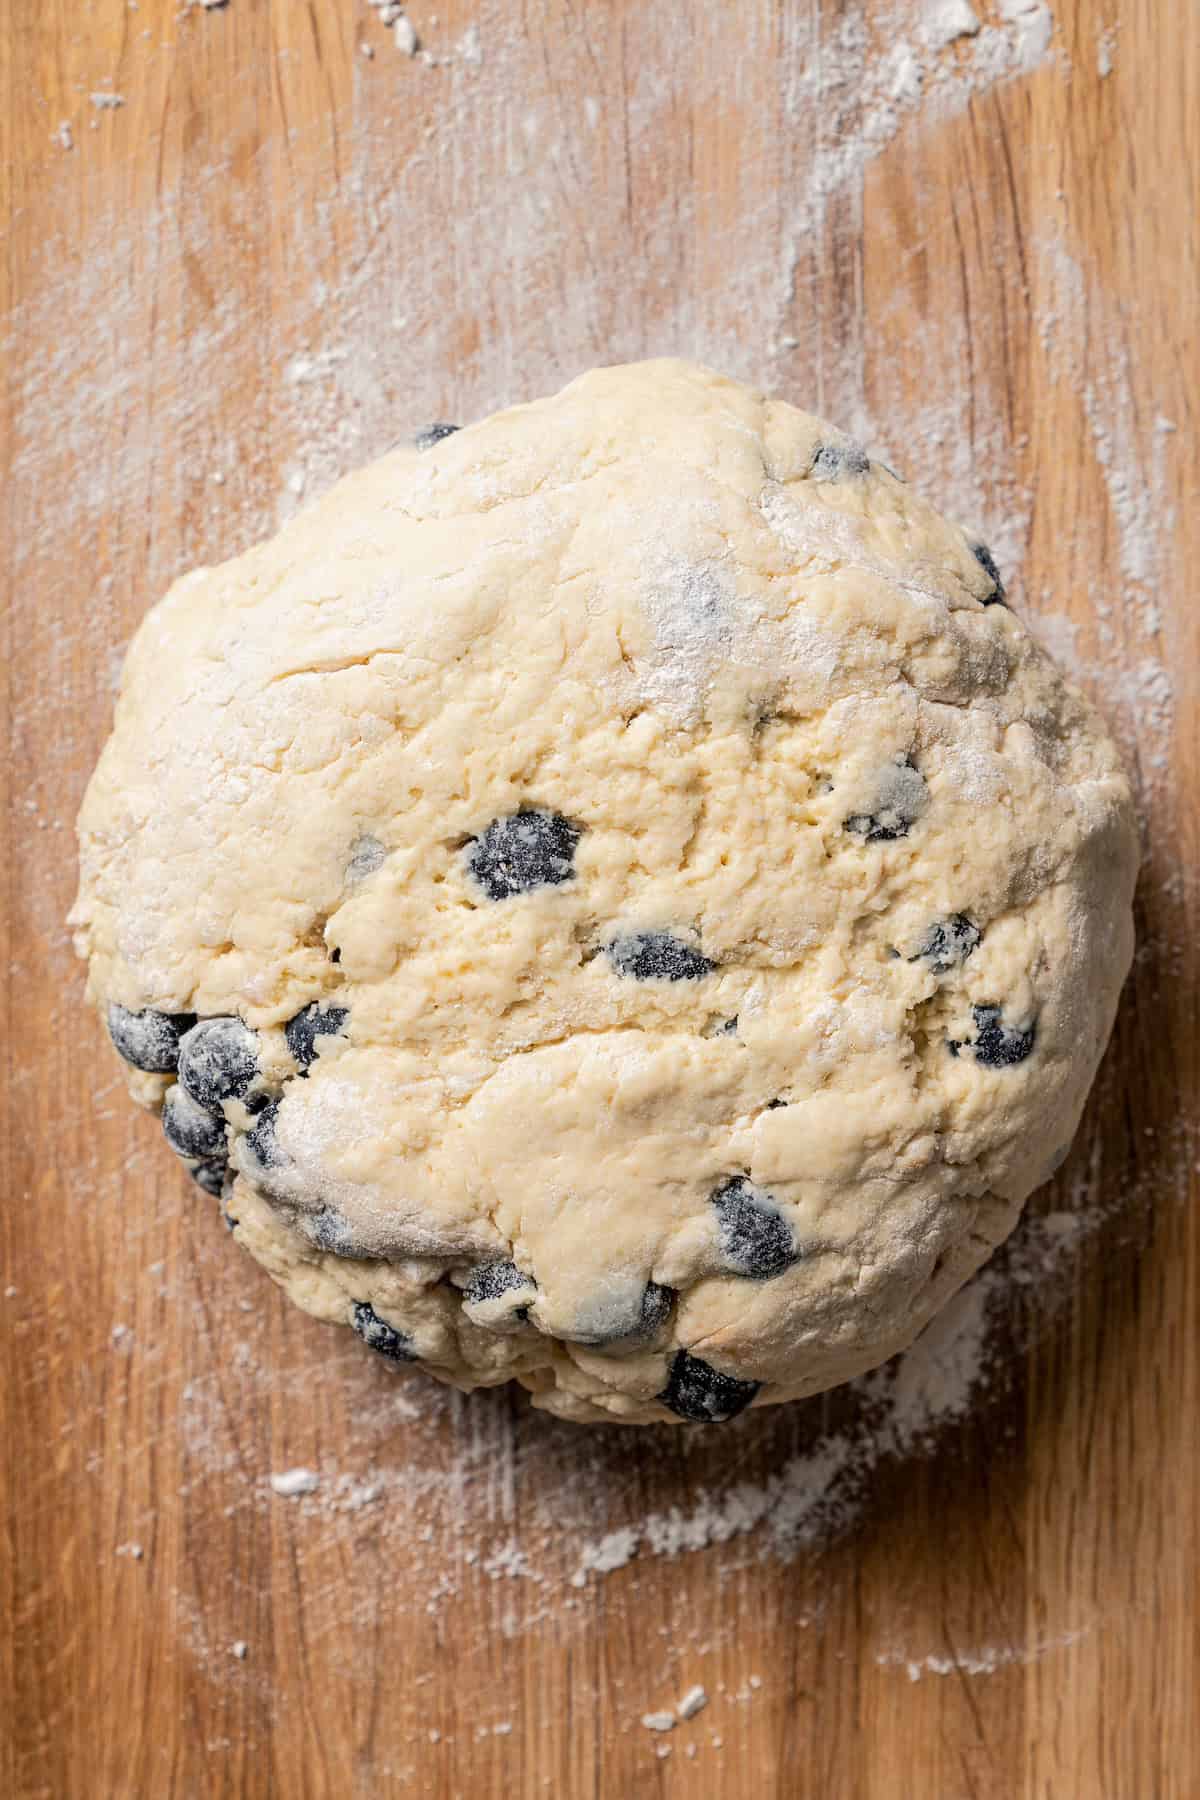 A large ball of blueberry scone dough on a floured wooden surface.